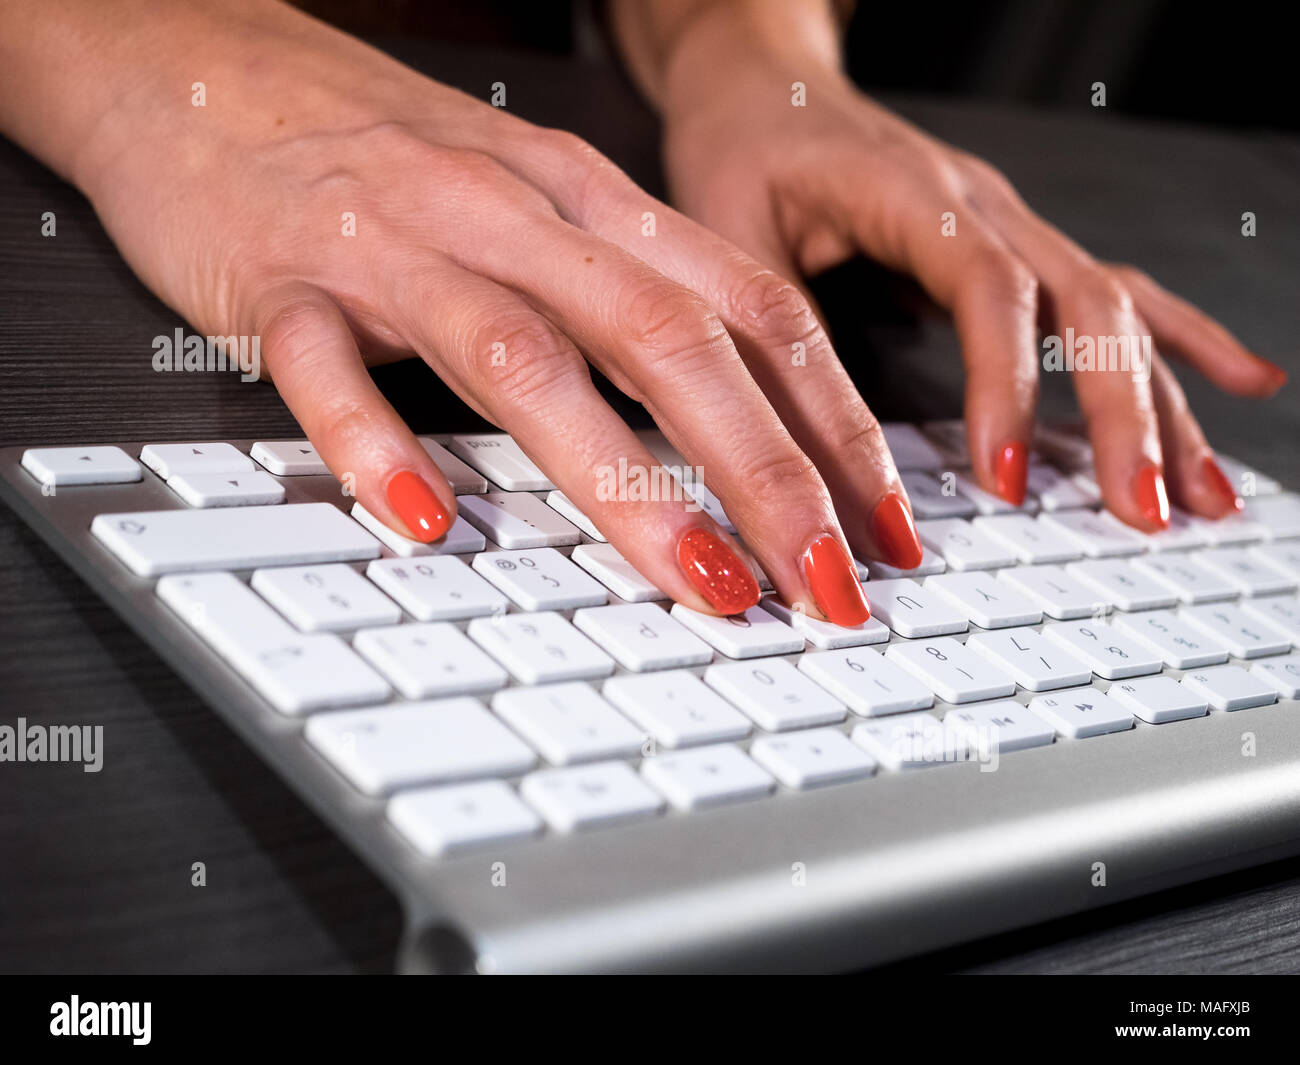 Woman with red nails typing on wireless keyboard Stock Photo